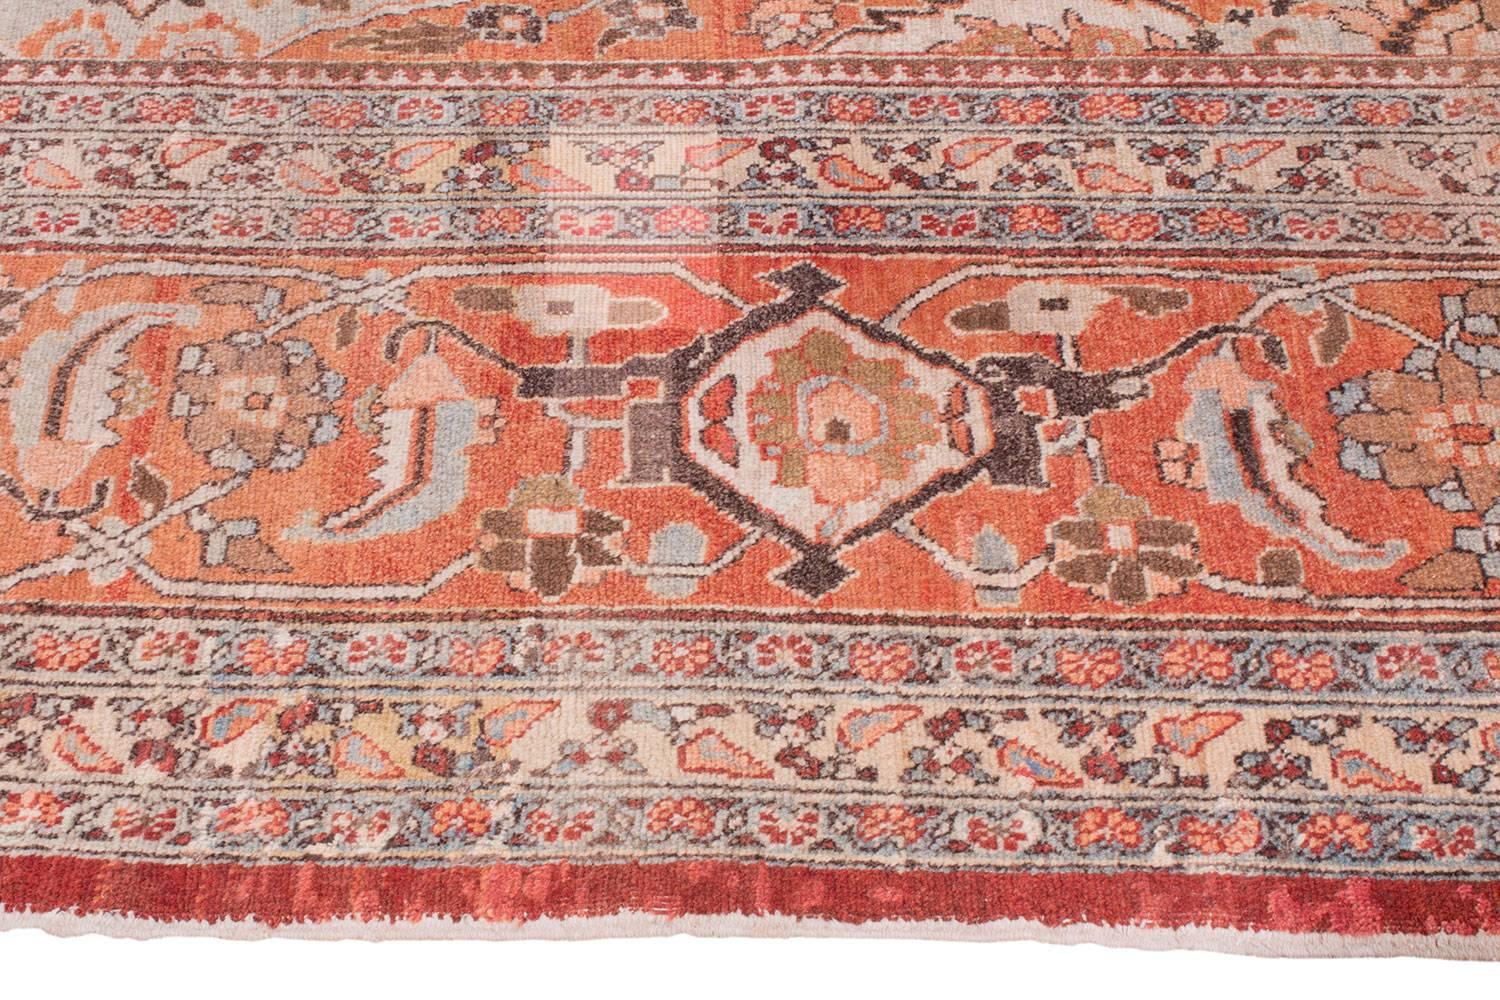 Hand-Woven A Dreamy Antique Tabriz Persian Rug 11x15 For Sale